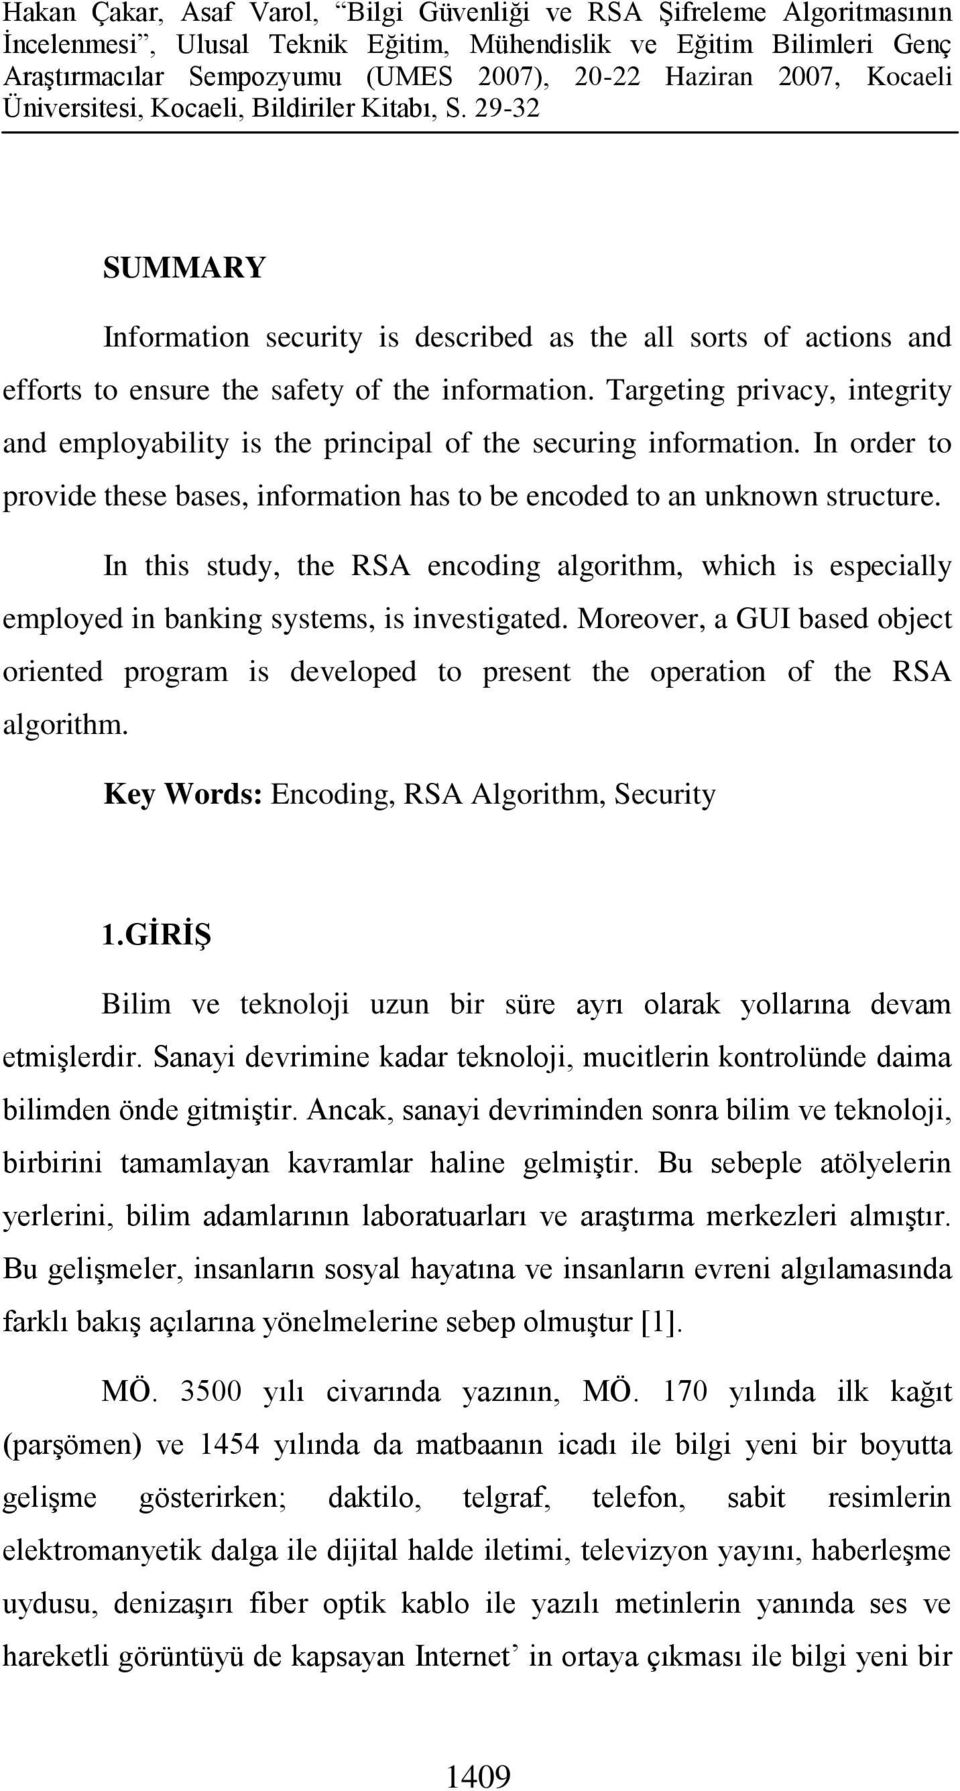 In this study, the RSA encoding algorithm, which is especially employed in banking systems, is investigated.